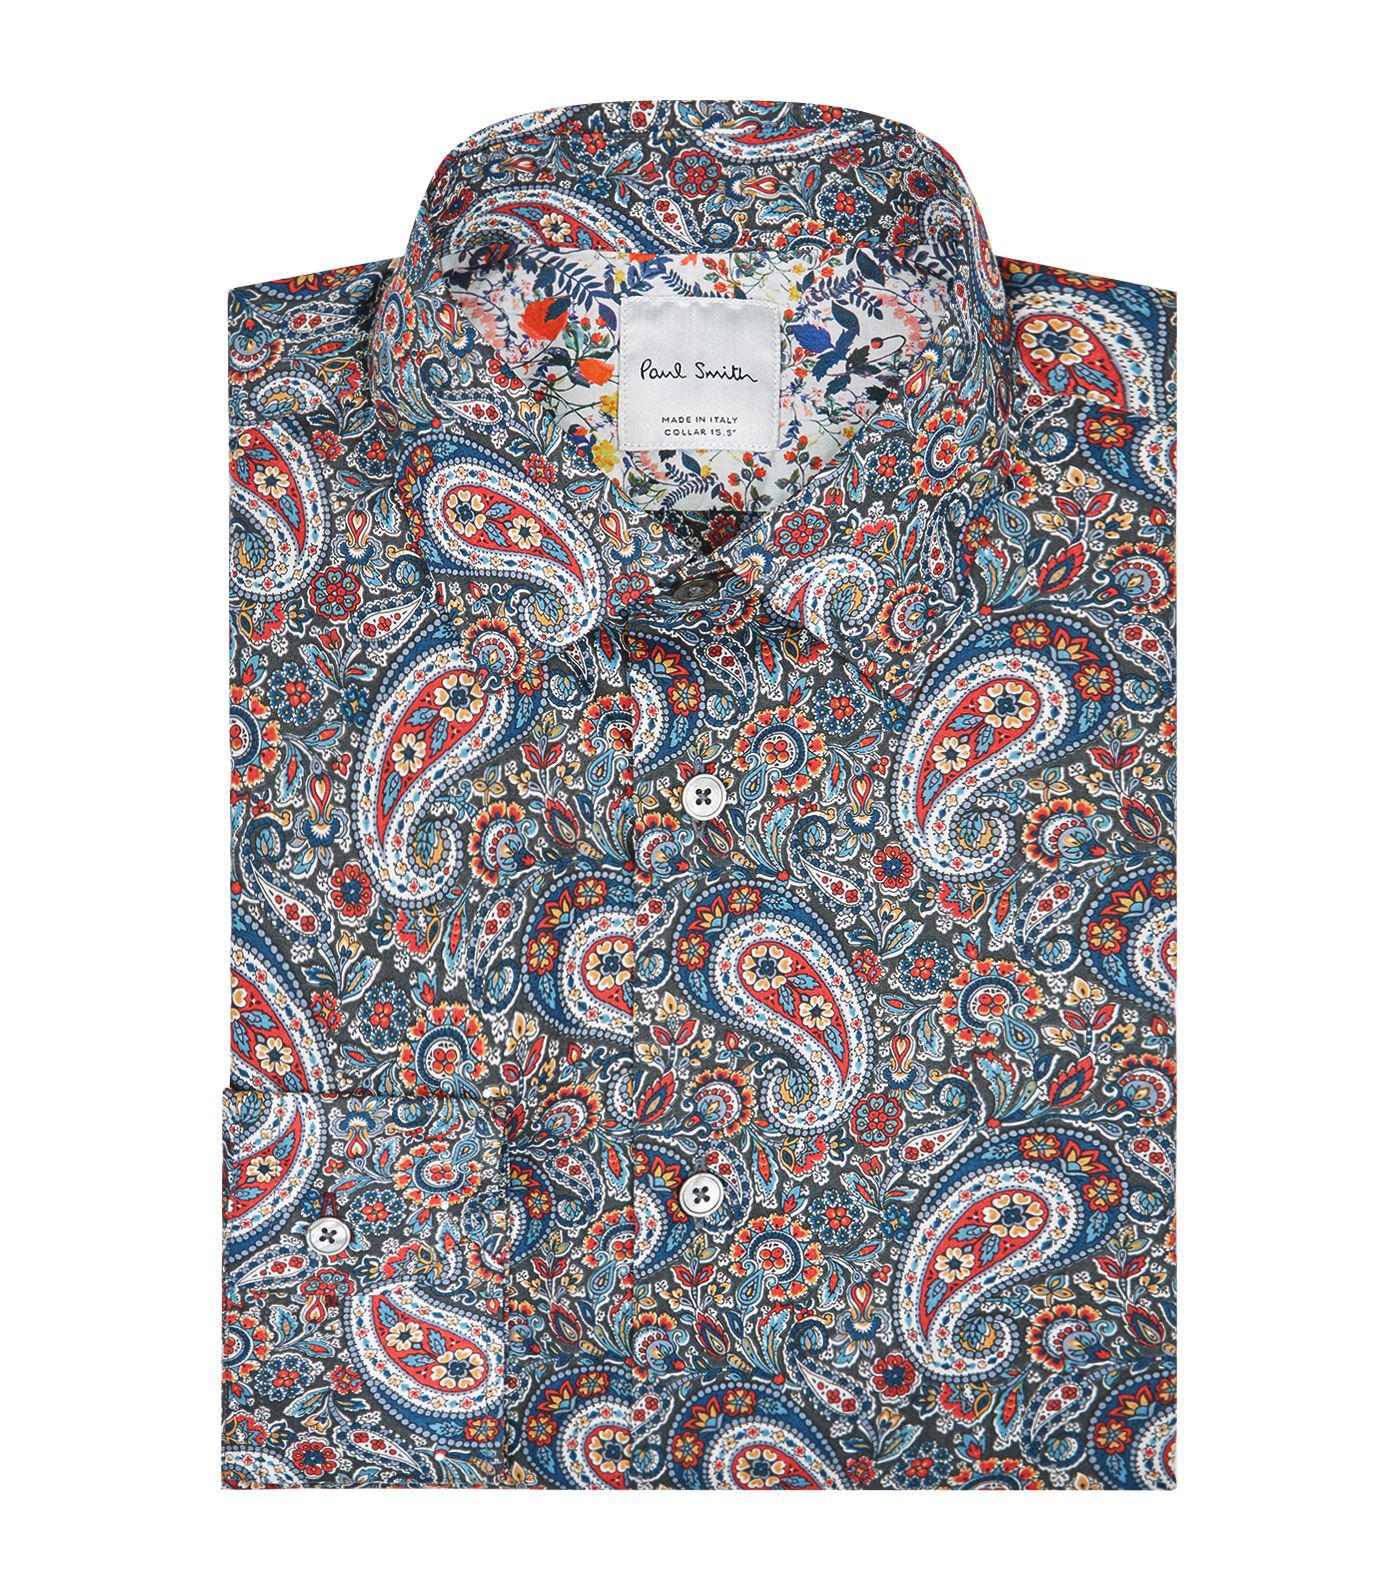 Paul Smith Cotton Paisley Shirt in Blue for Men | Lyst